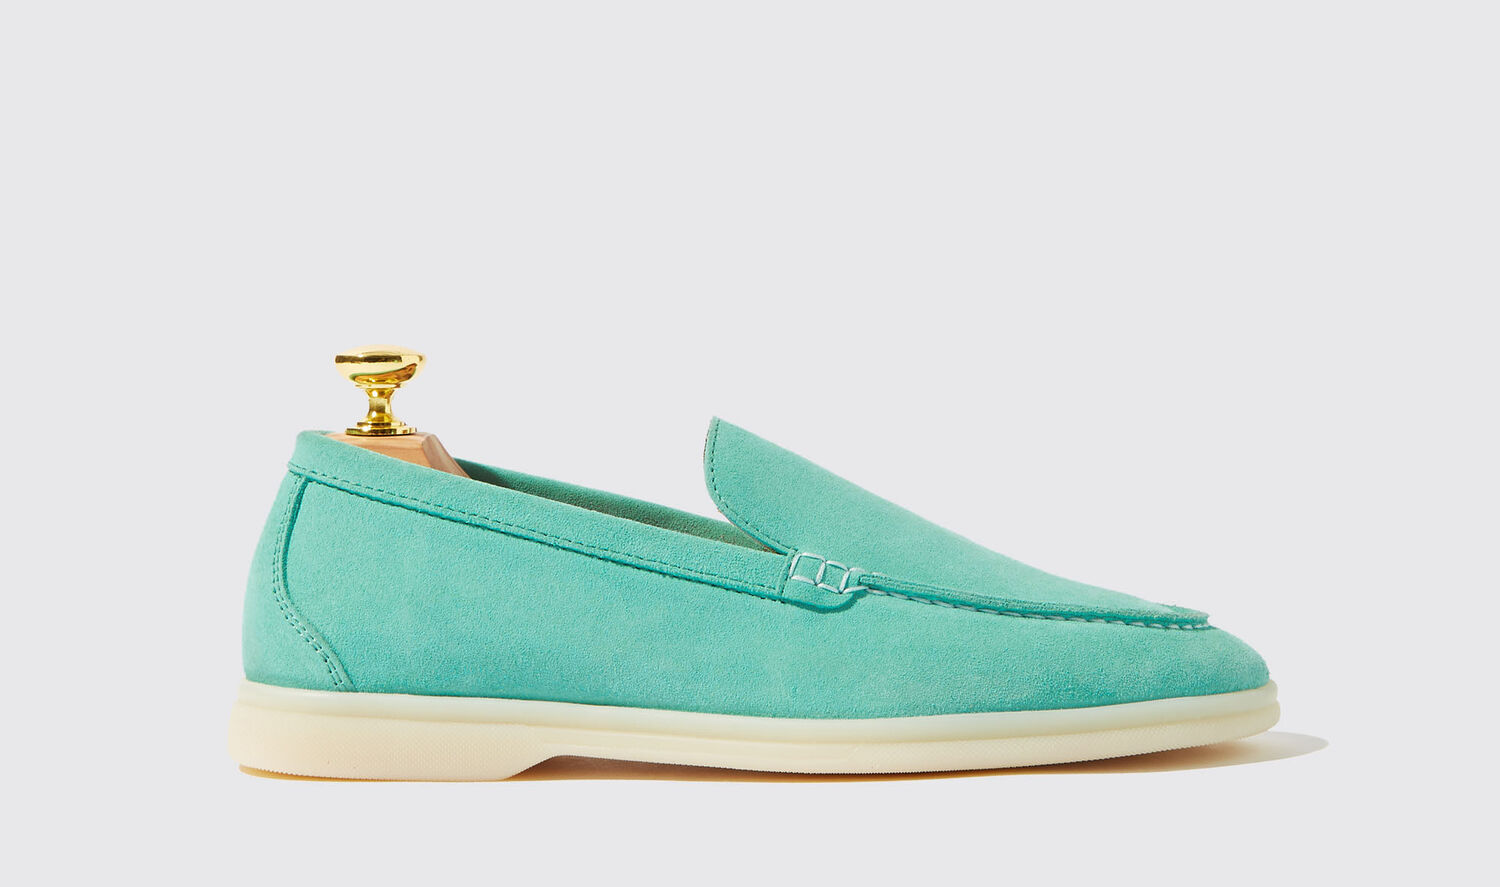 Scarosso Loafers Ludovica Turchese Scamosciata Suede Leather In Turquoise - Suede